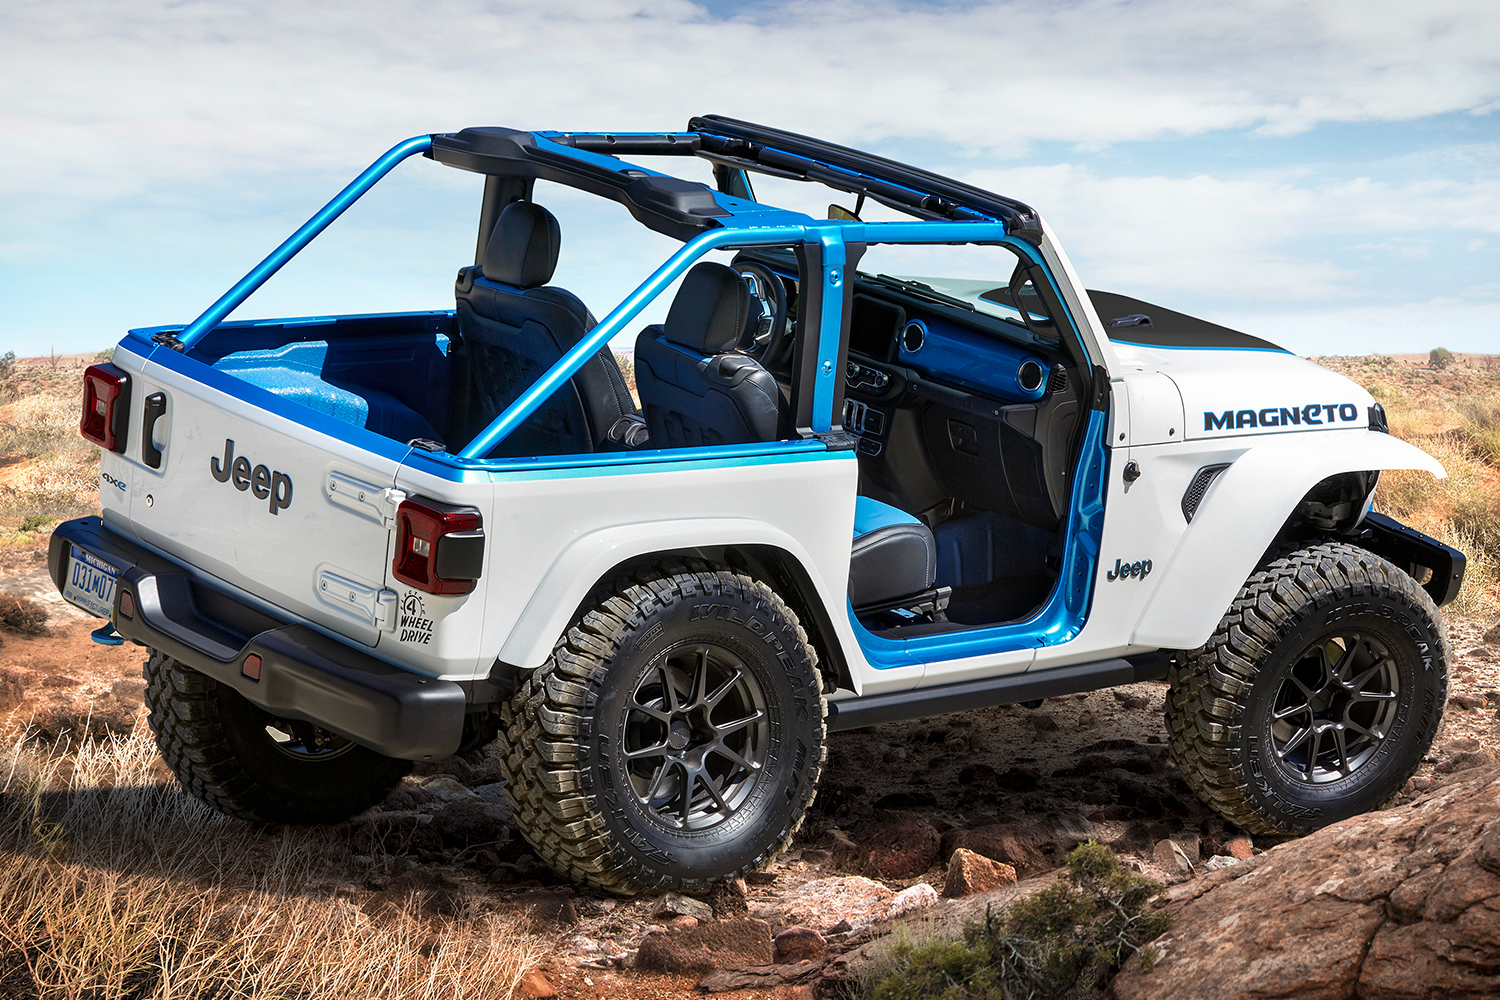 The Electric Jeep Wrangler Magneto Concept Vehicle